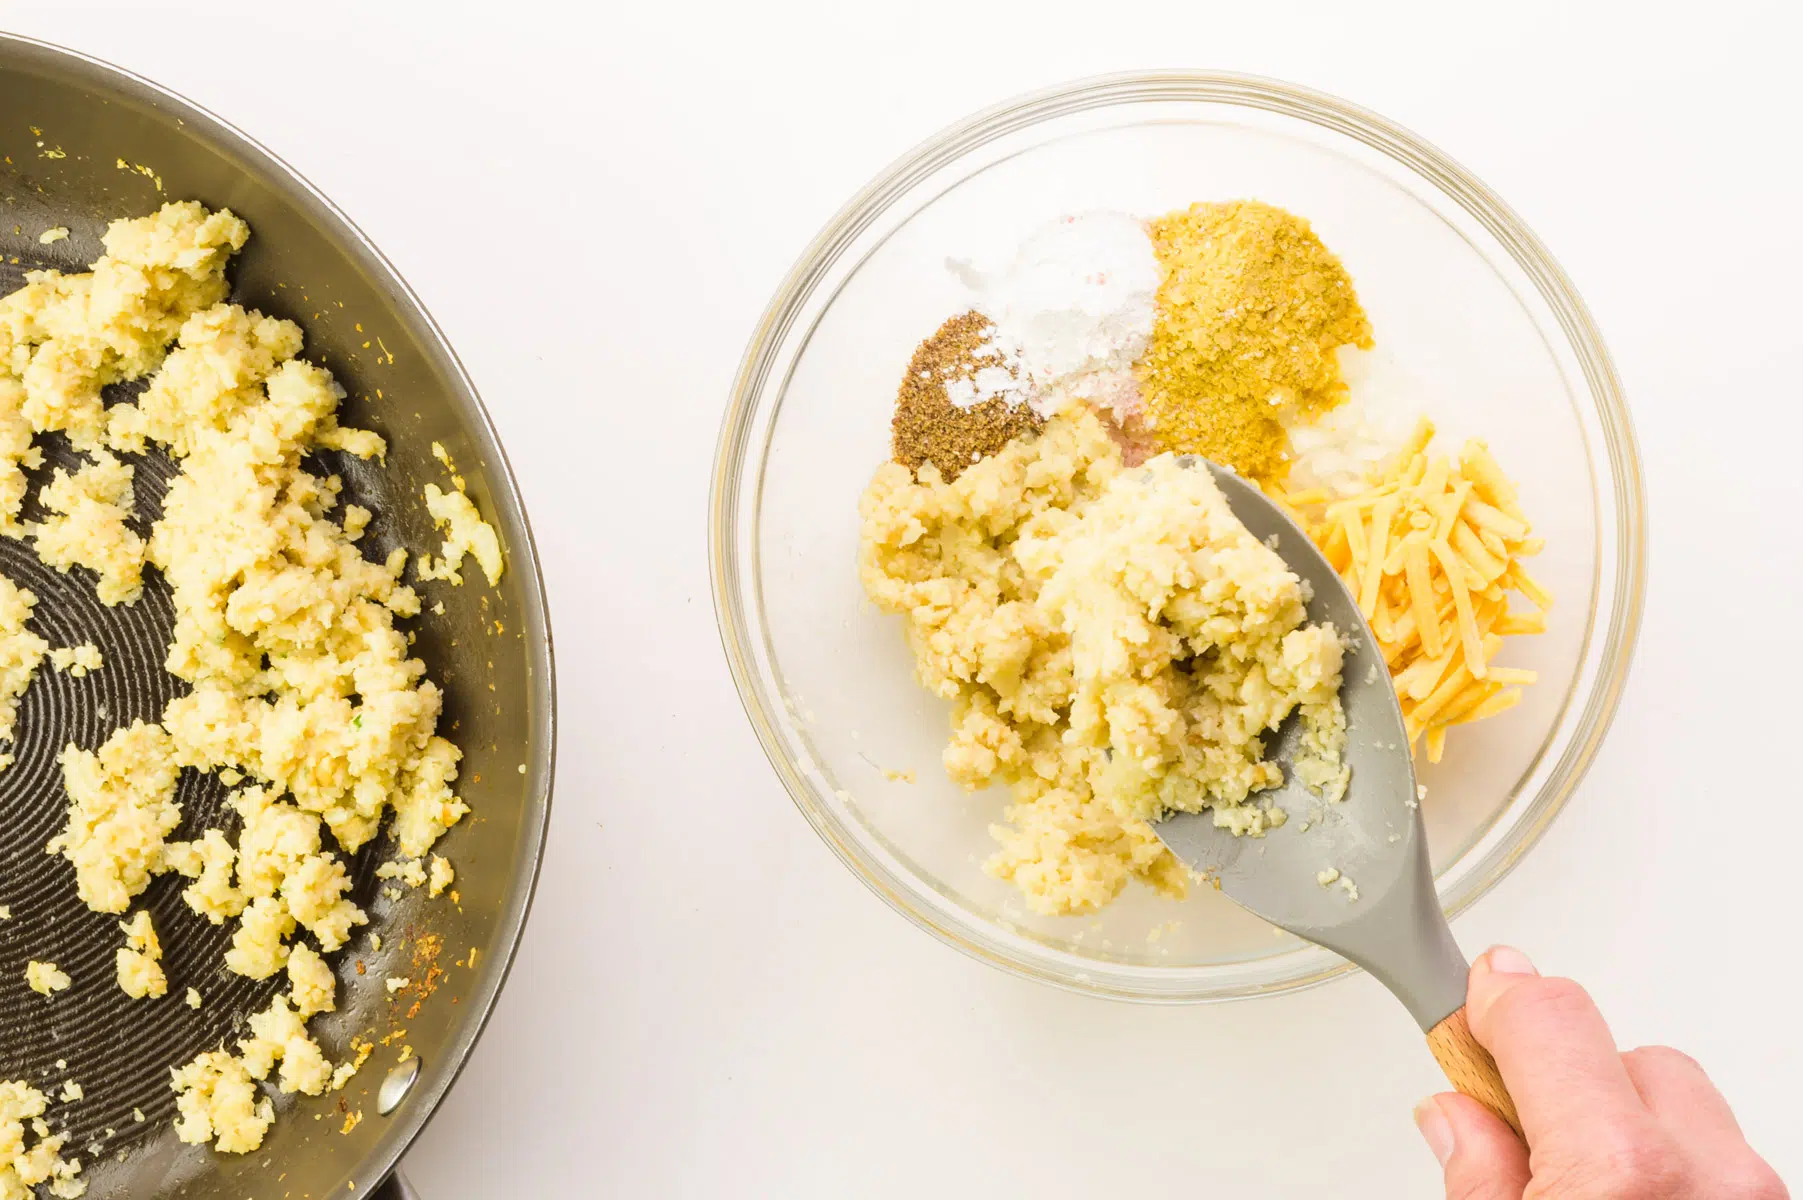 A hand holds a spatula, adding cooked cauliflower rice to a bowl with other ingredients.